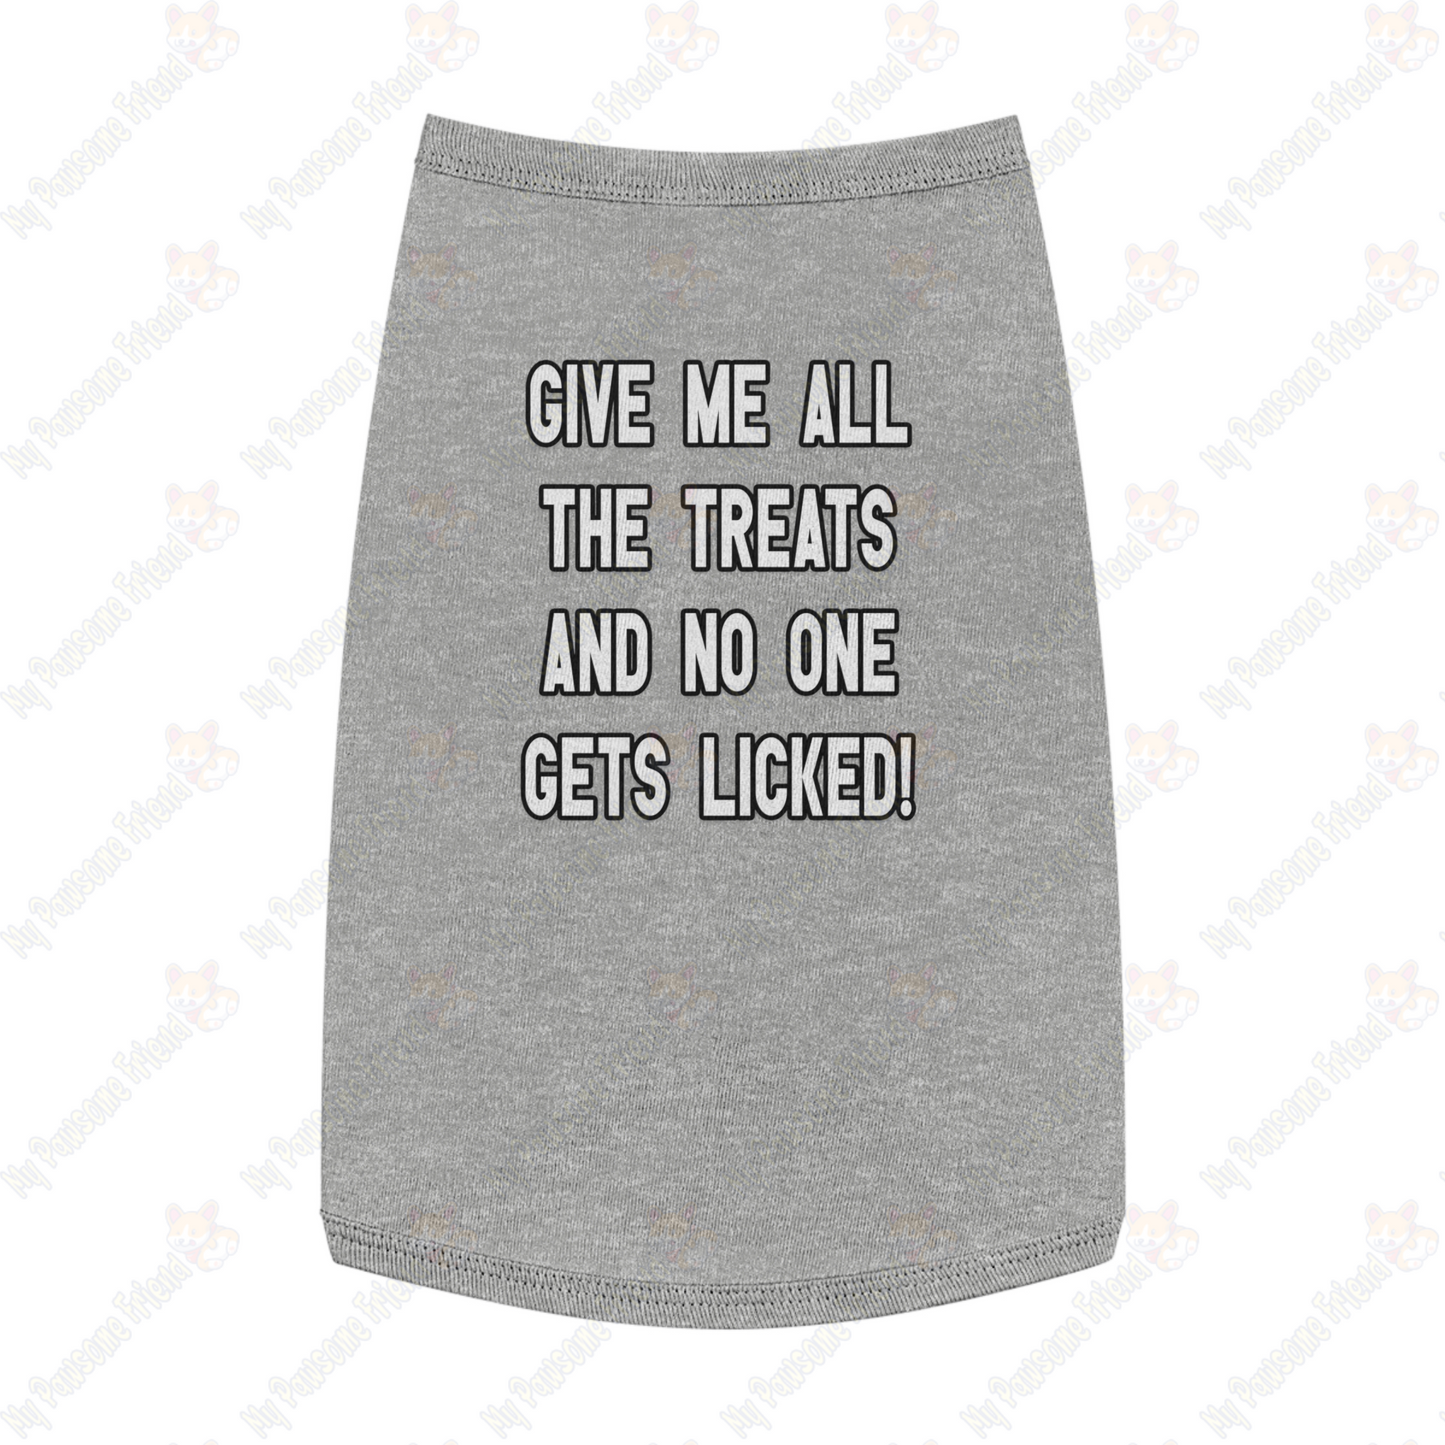 GIVE ME THE TREATS AND NO ONE GETS LICKED! Pet Tank Top grey